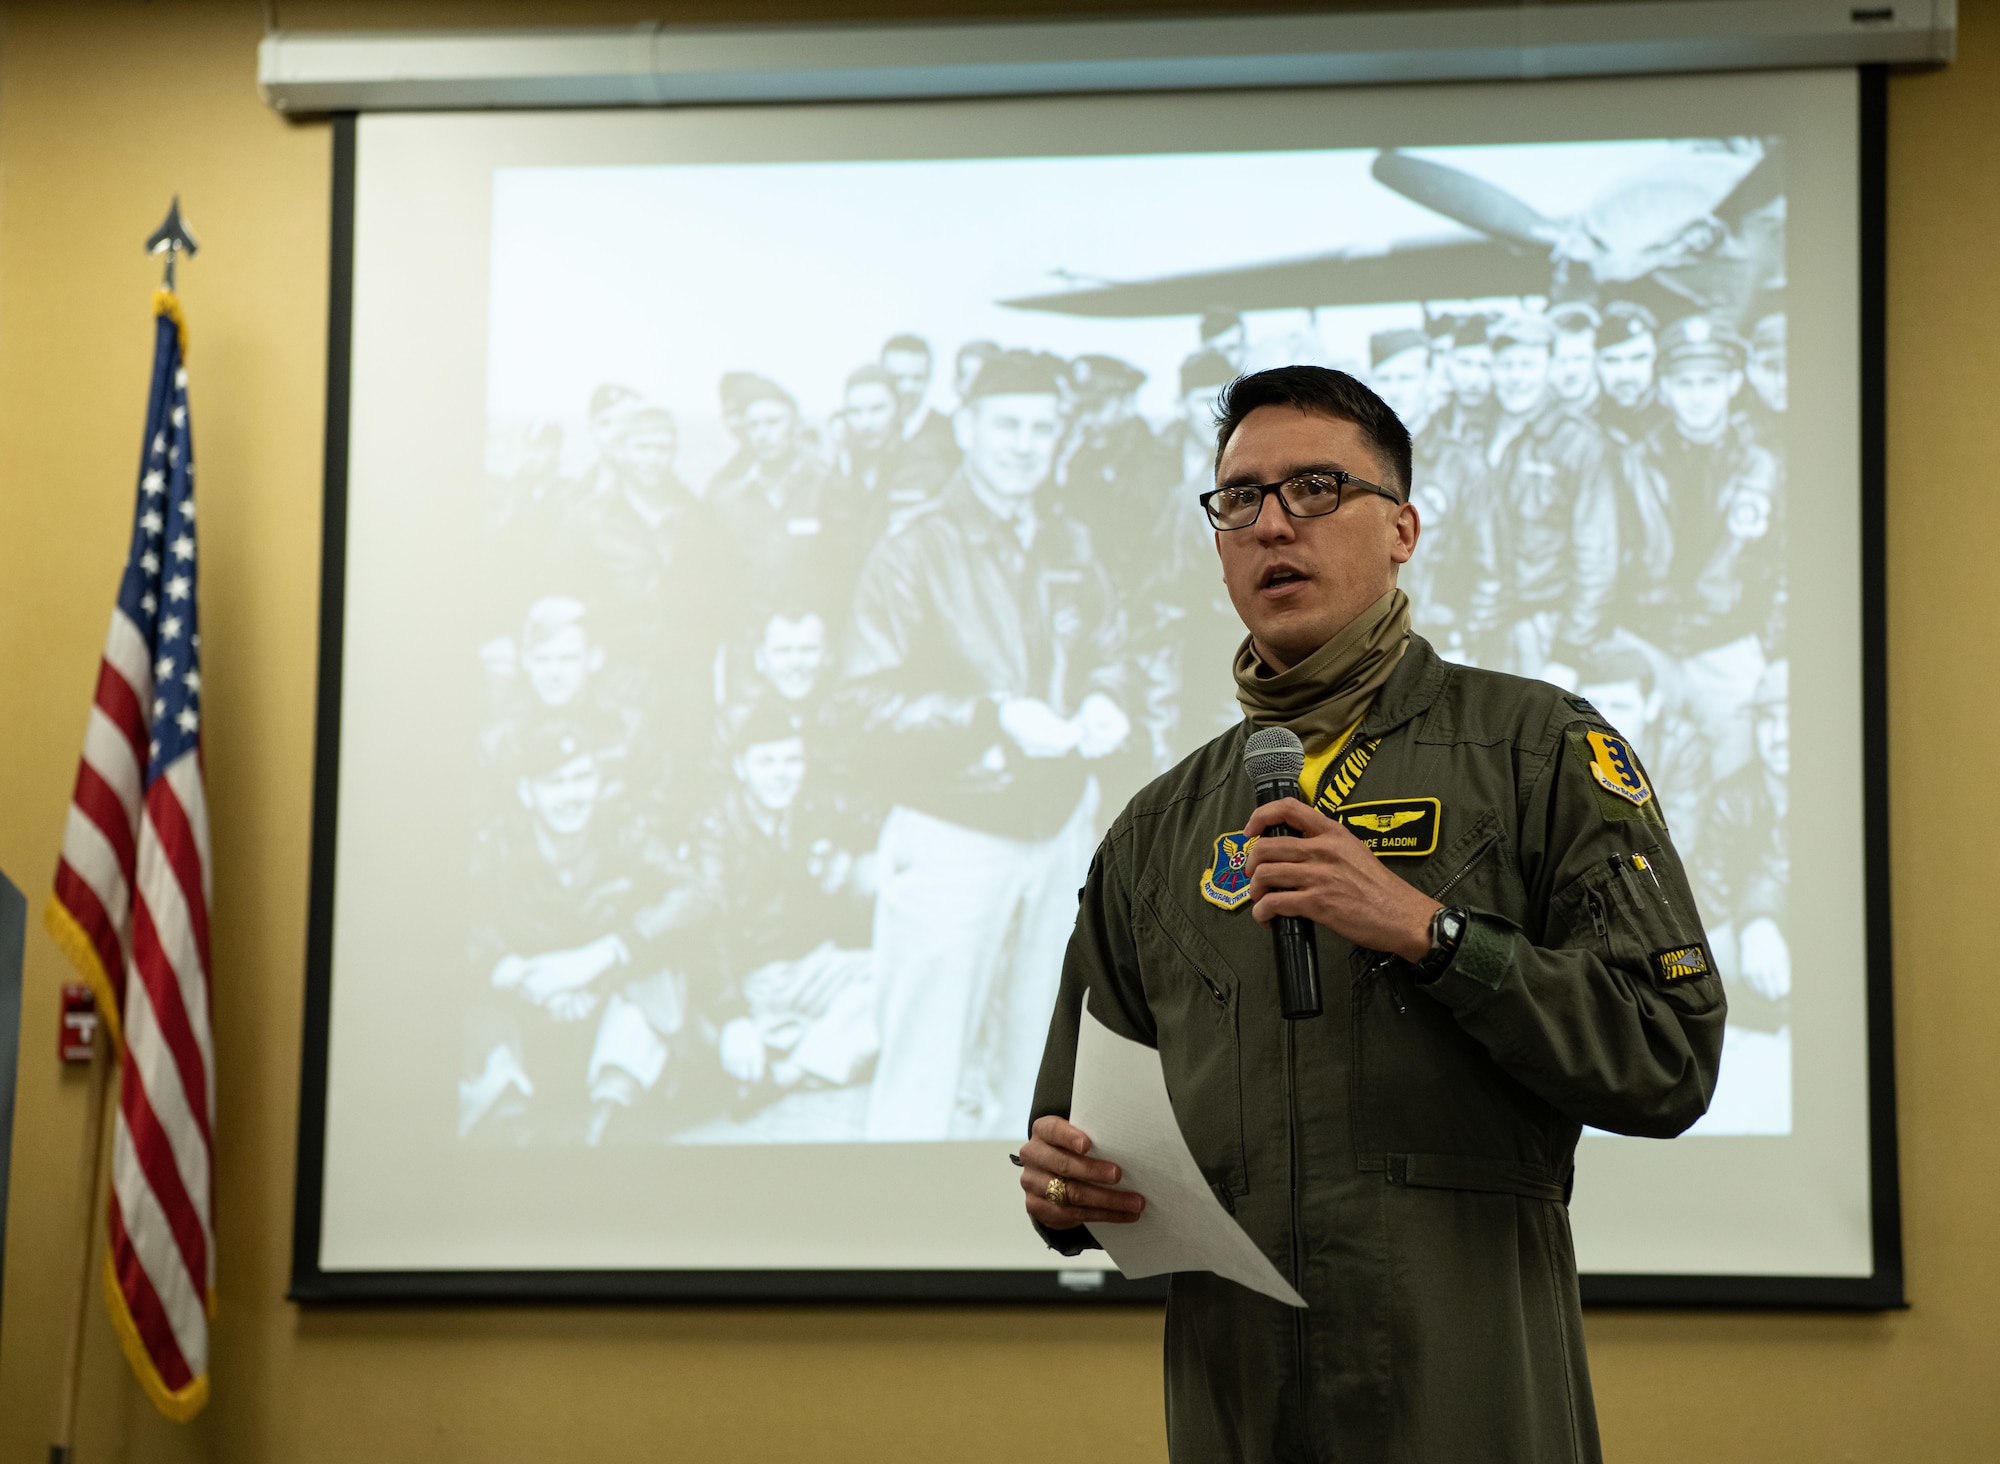 First Lt. Lance Badoni, a 37th Bomb Squadron weapon systems officer, speaks to the history of the Doolittle Raid during a remembrance ceremony on Ellsworth Air Force Base, S.D., April 16, 2021. The operation originally took place on April 18, 1942 after Japanese forces launched a surprise bombing on Pearl Harbor.  (U.S. Air Force photo by Airman Jonah Fronk)